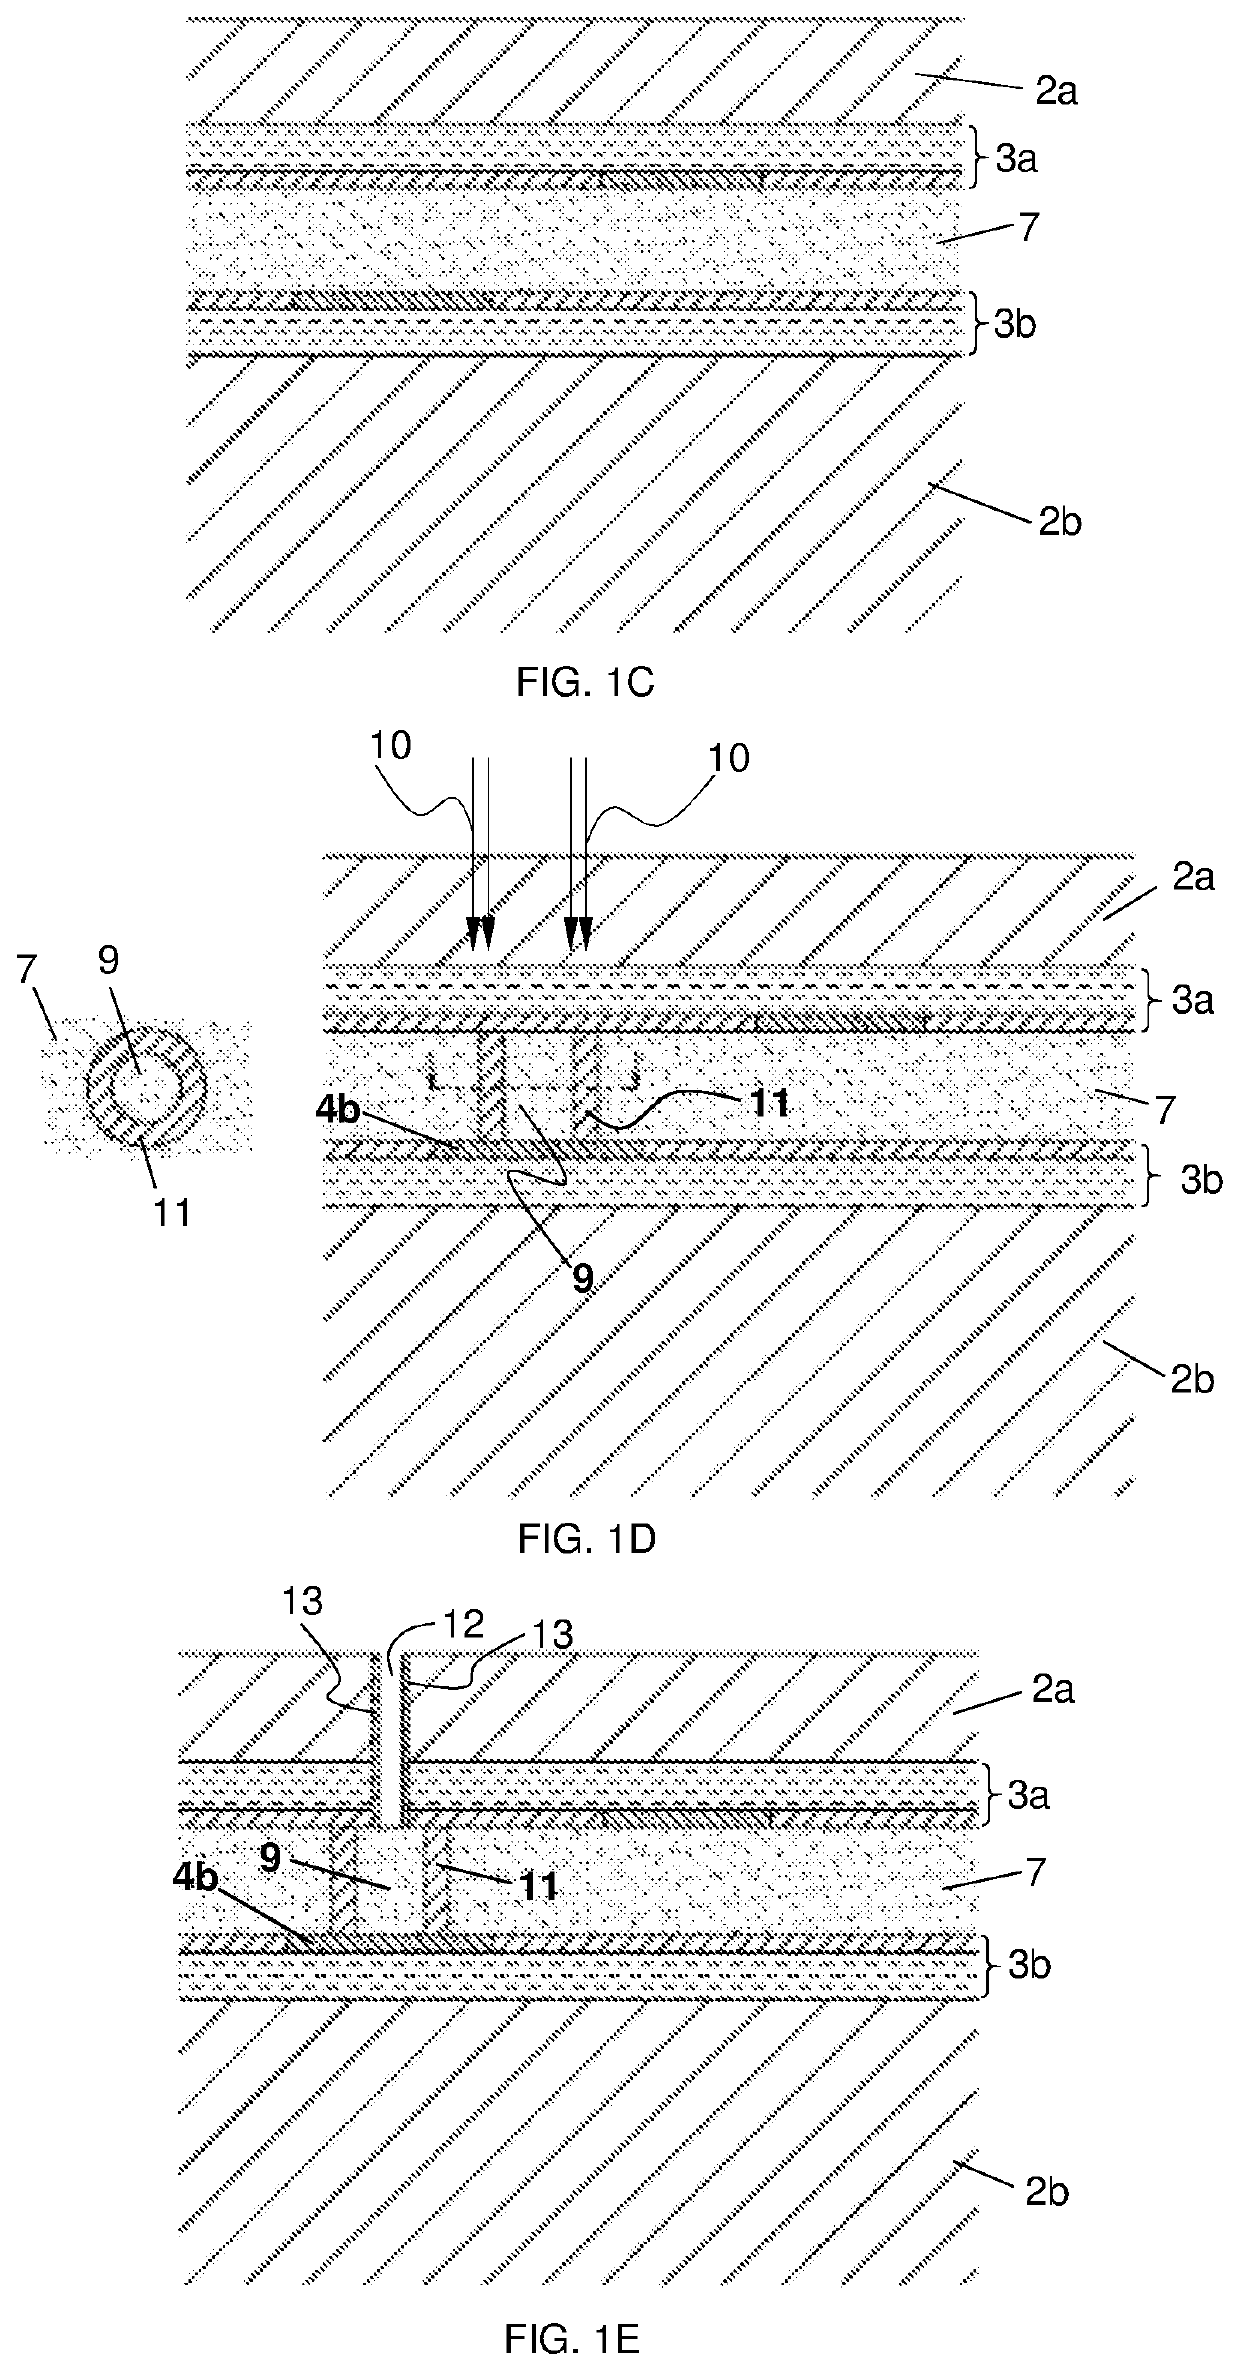 Method for bonding and interconnecting semiconductor chips